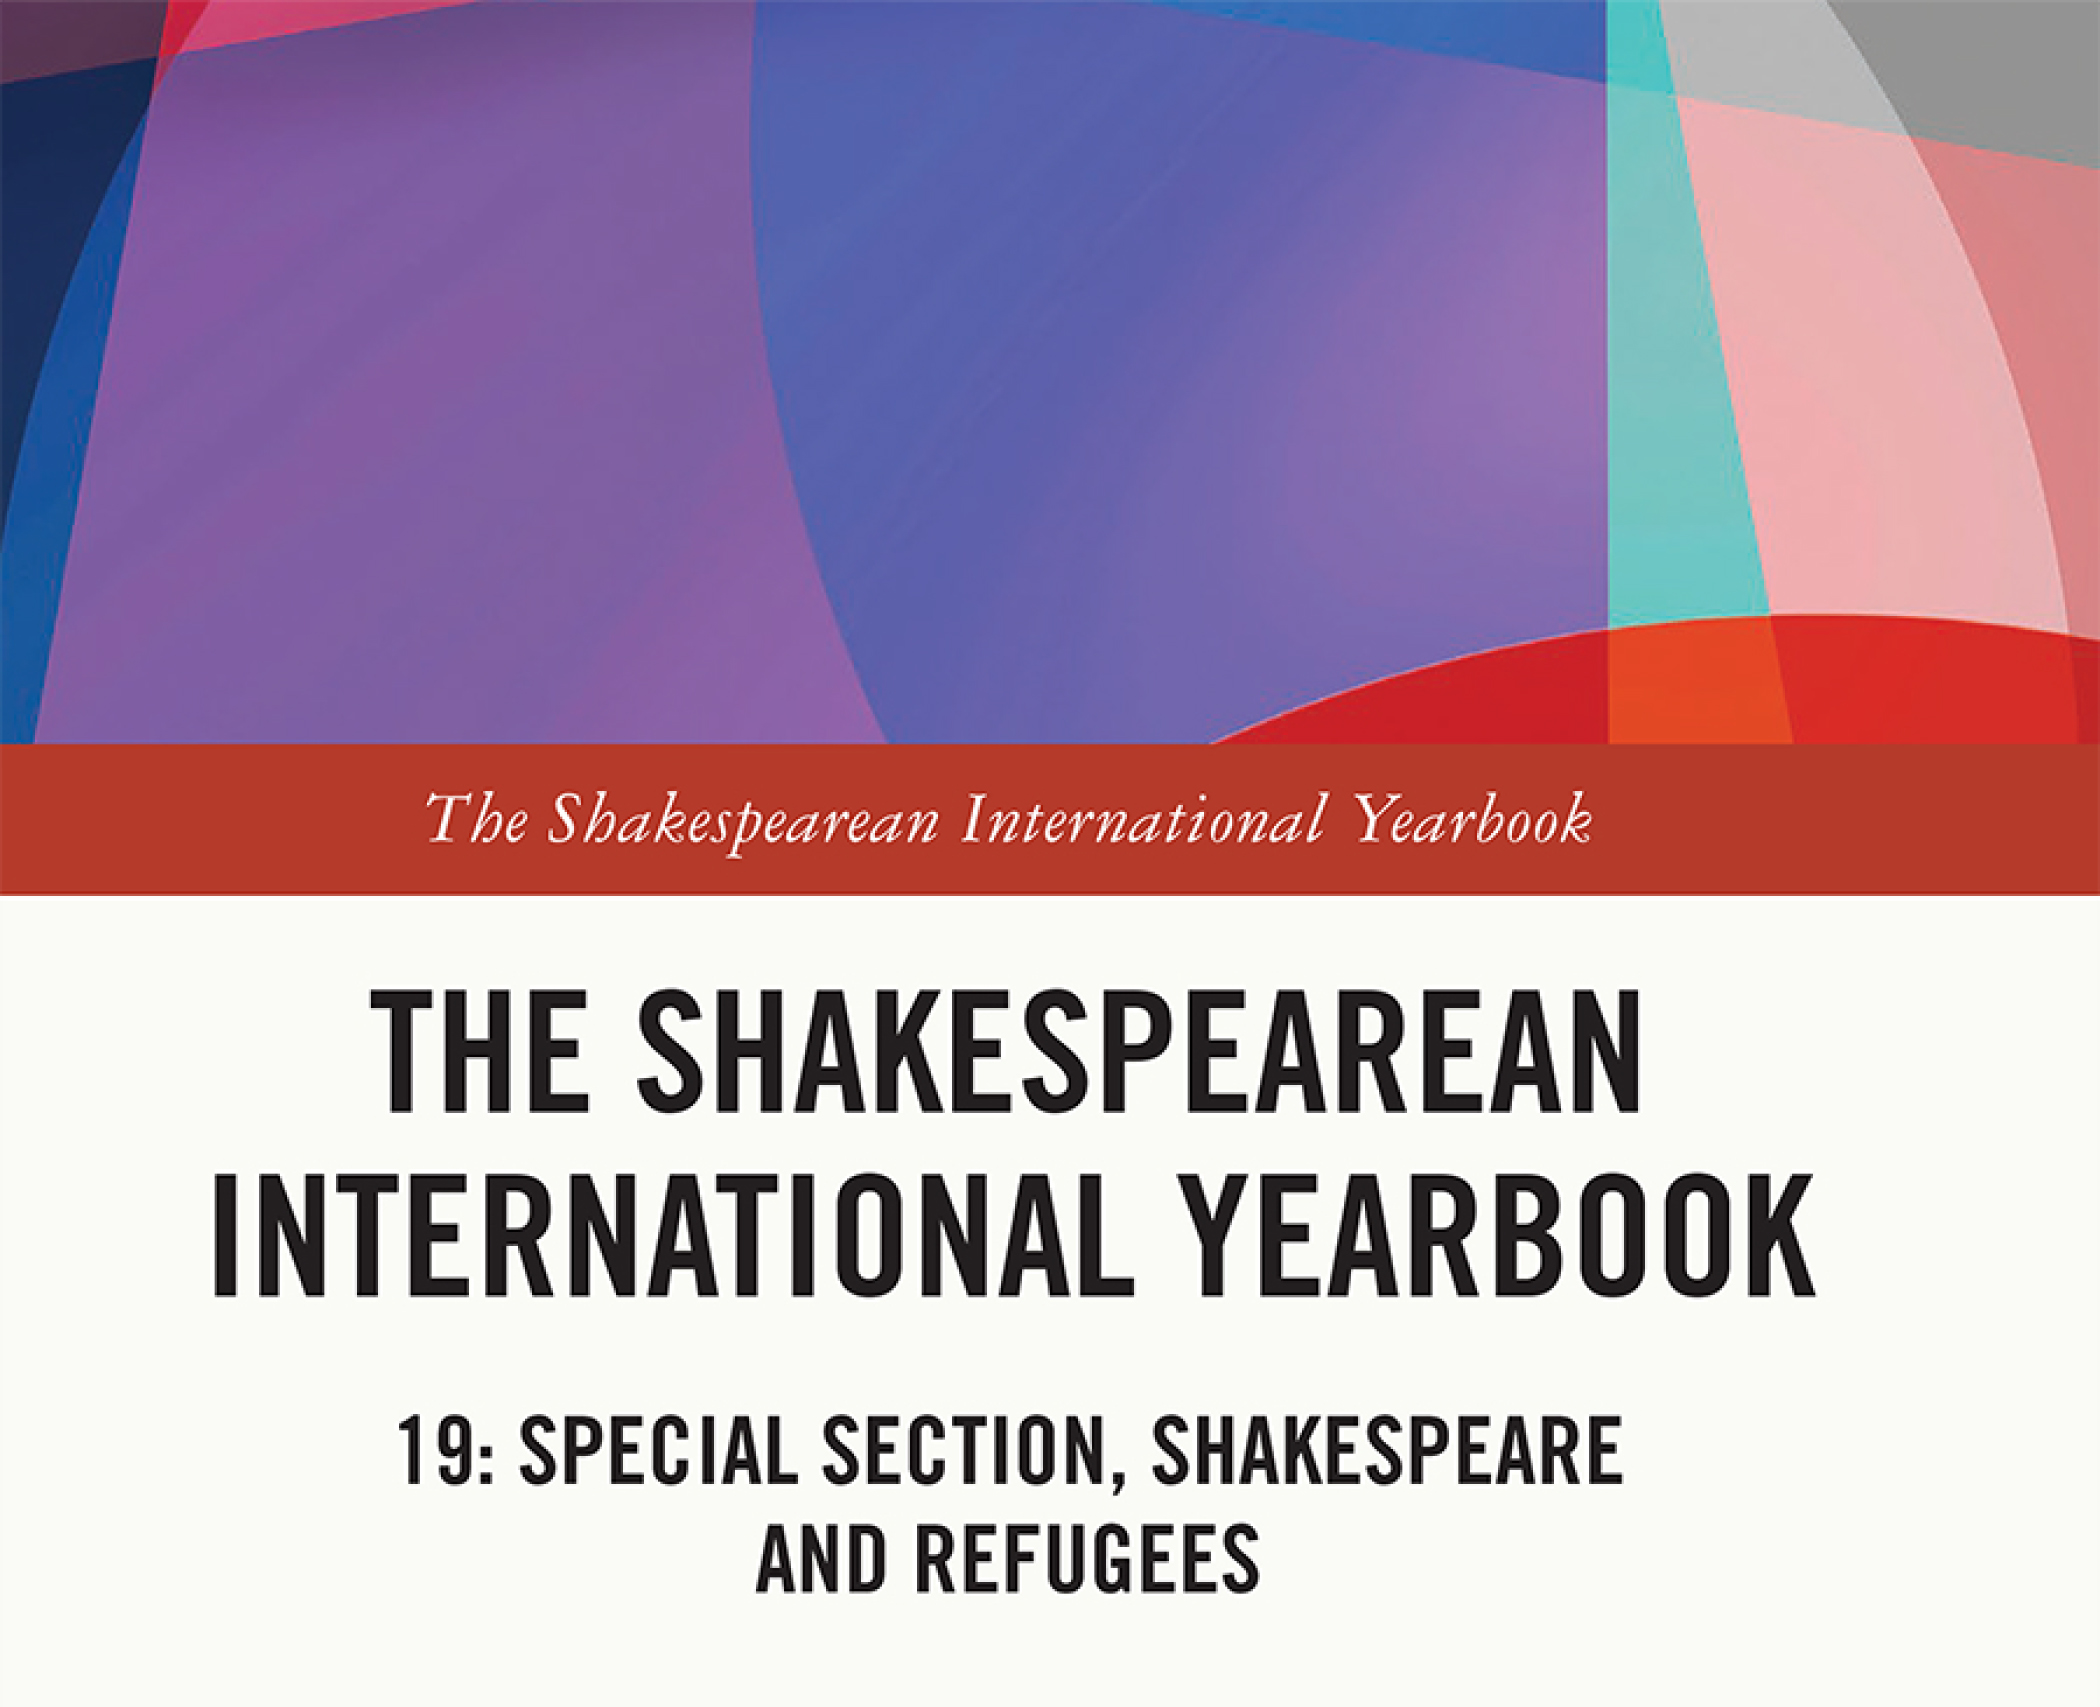 Refugees the Theme of the Shakespearean International Yearbook Vol. 19